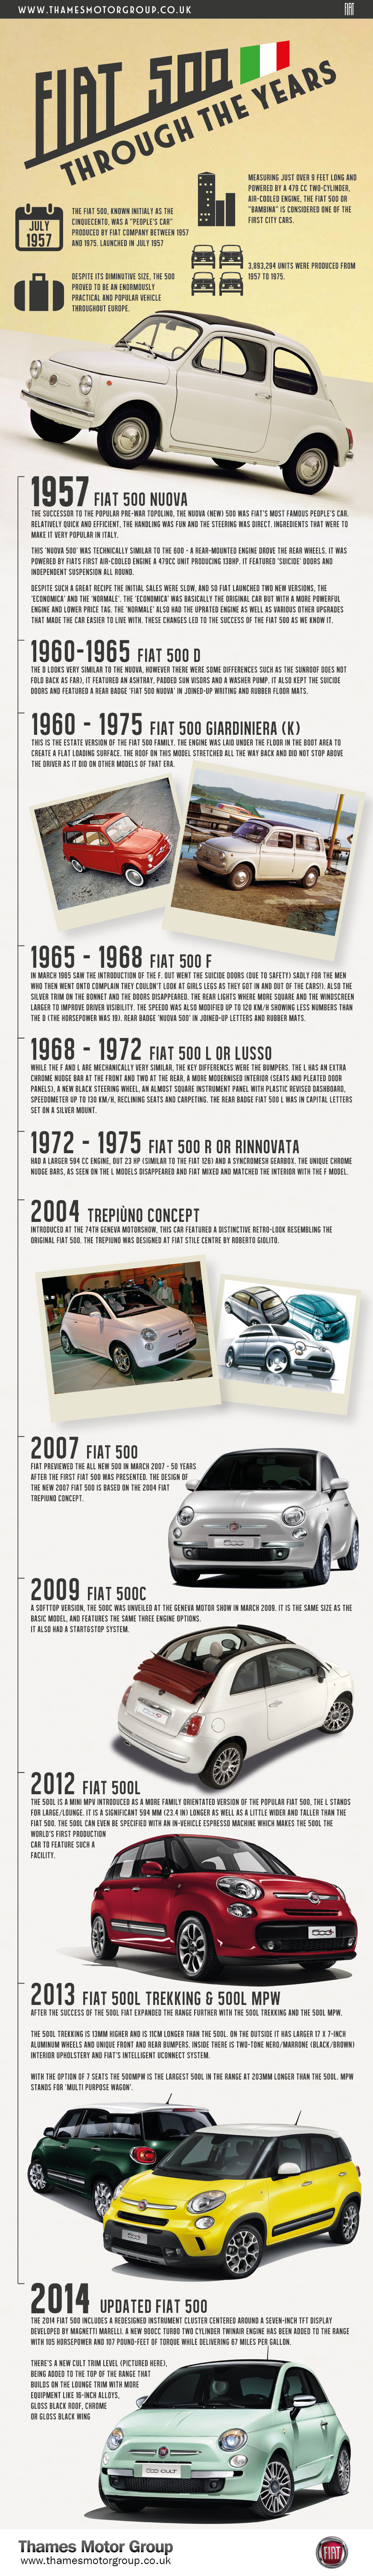 FIAT 500 Through The Years